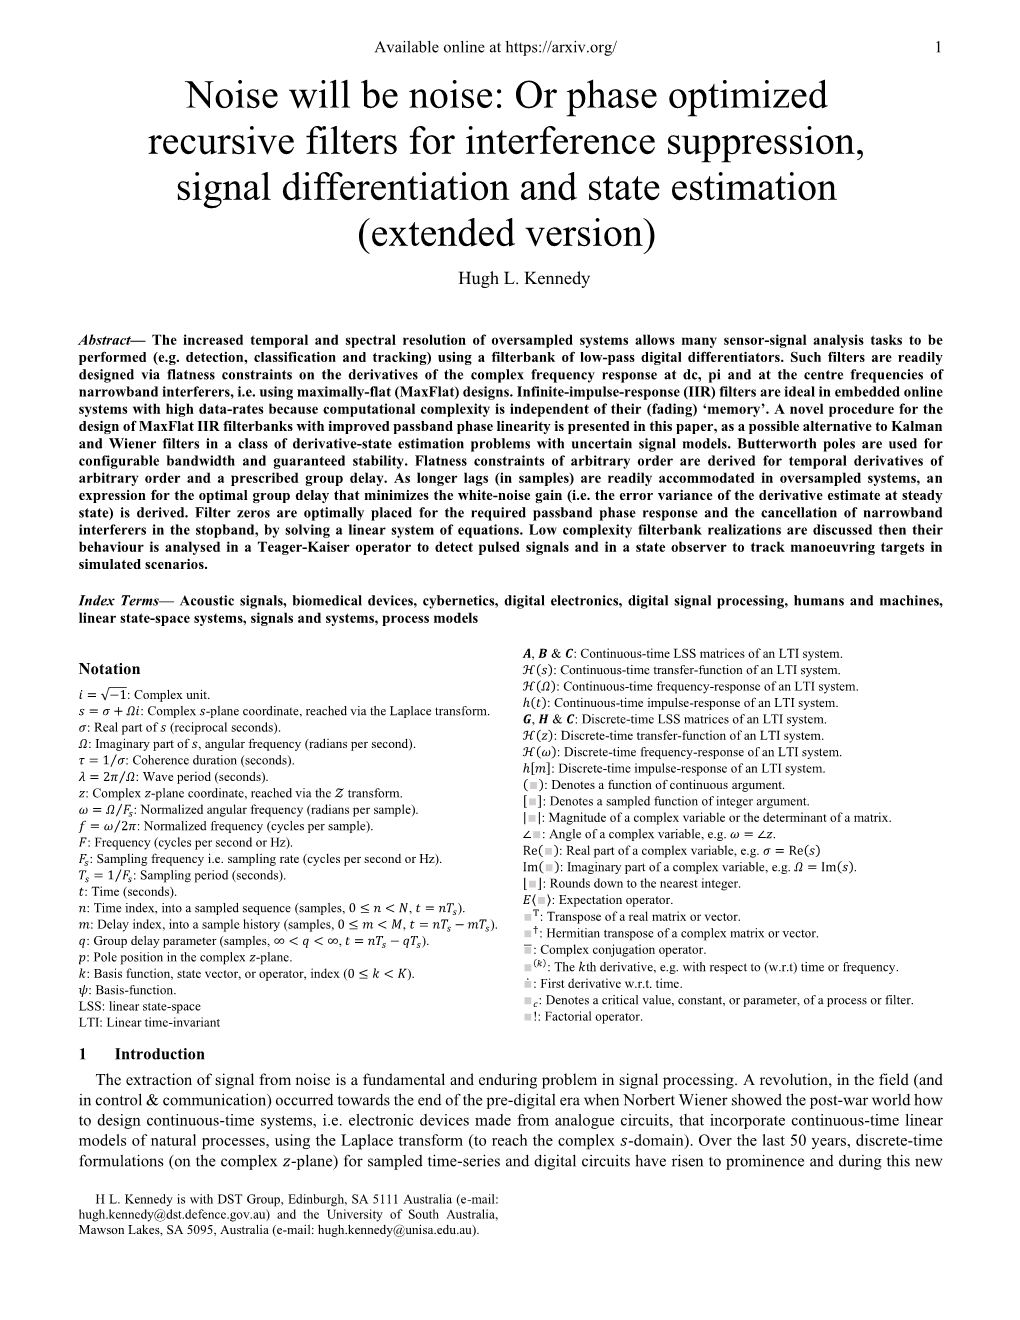 Noise Will Be Noise: Or Phase Optimized Recursive Filters for Interference Suppression, Signal Differentiation and State Estimation (Extended Version) Hugh L